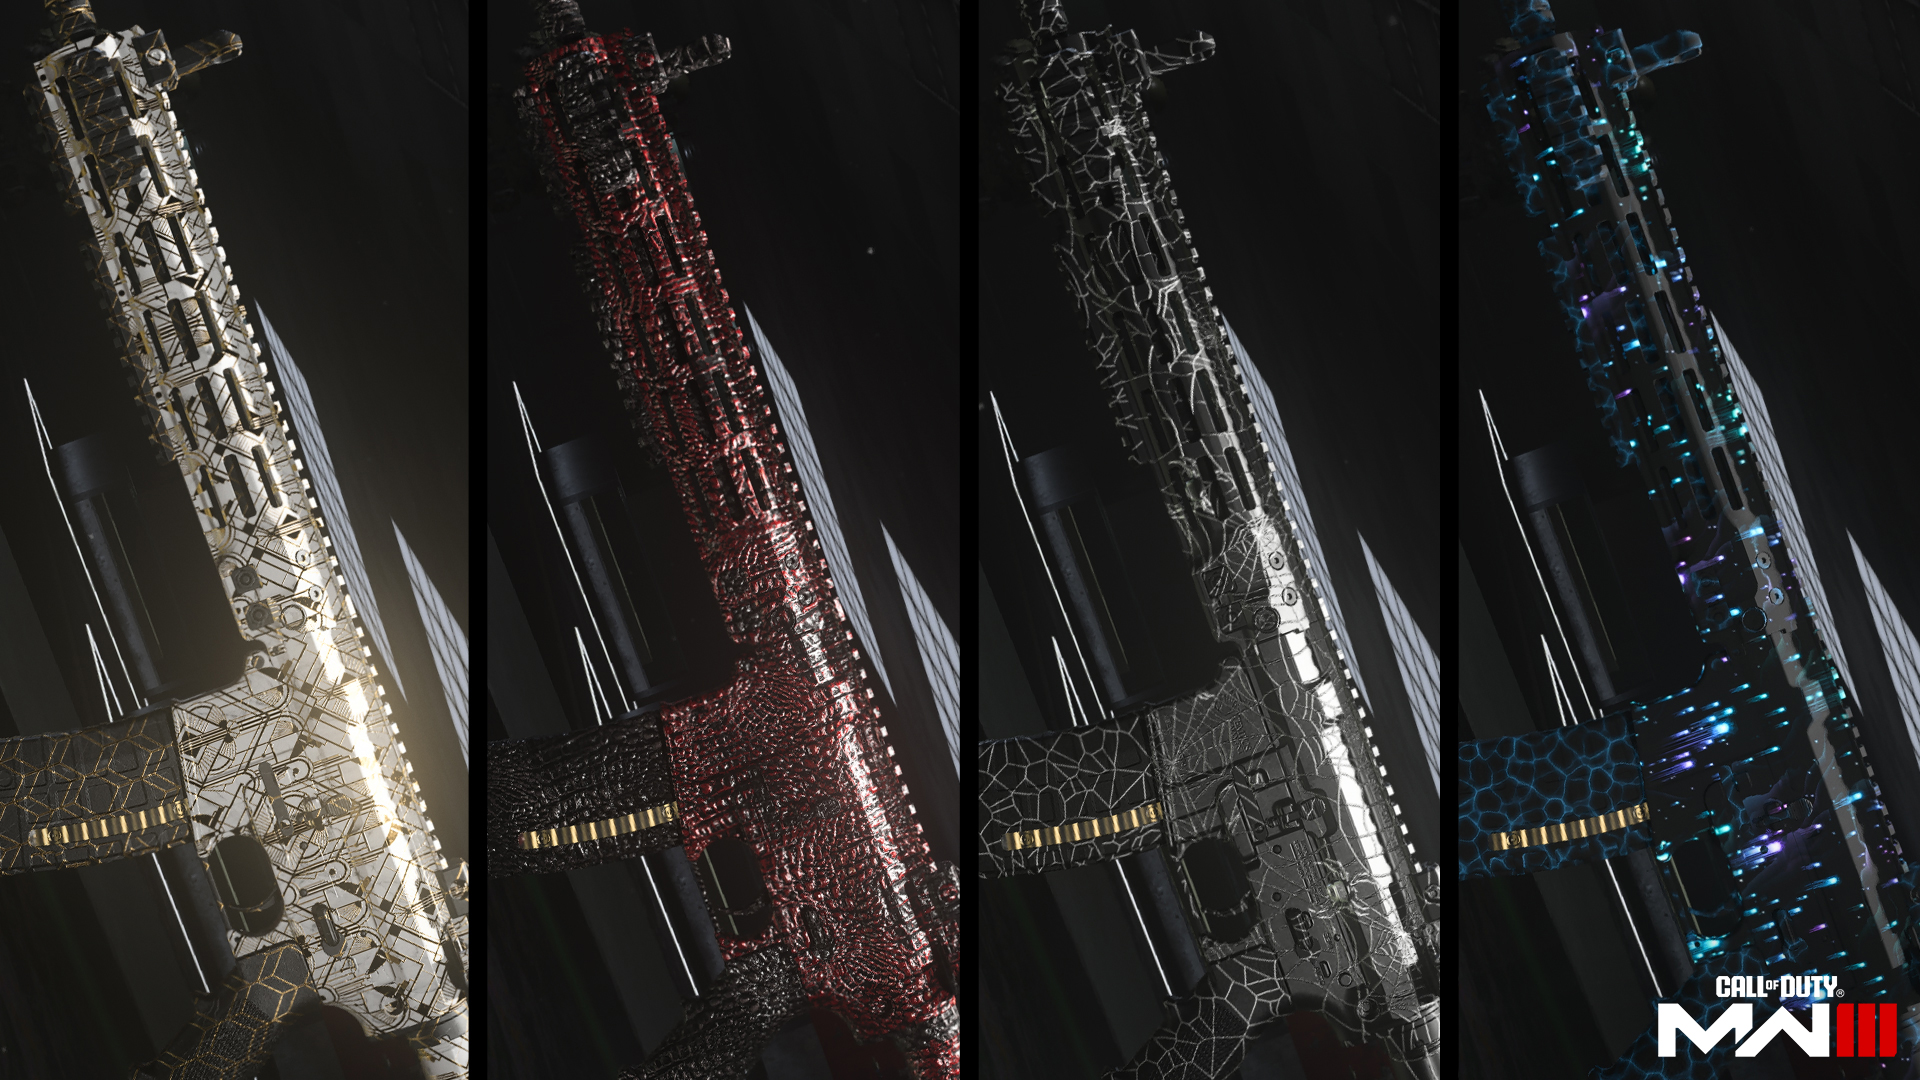 An image of all MW3 Zombies mastery camos for MW2 guns.